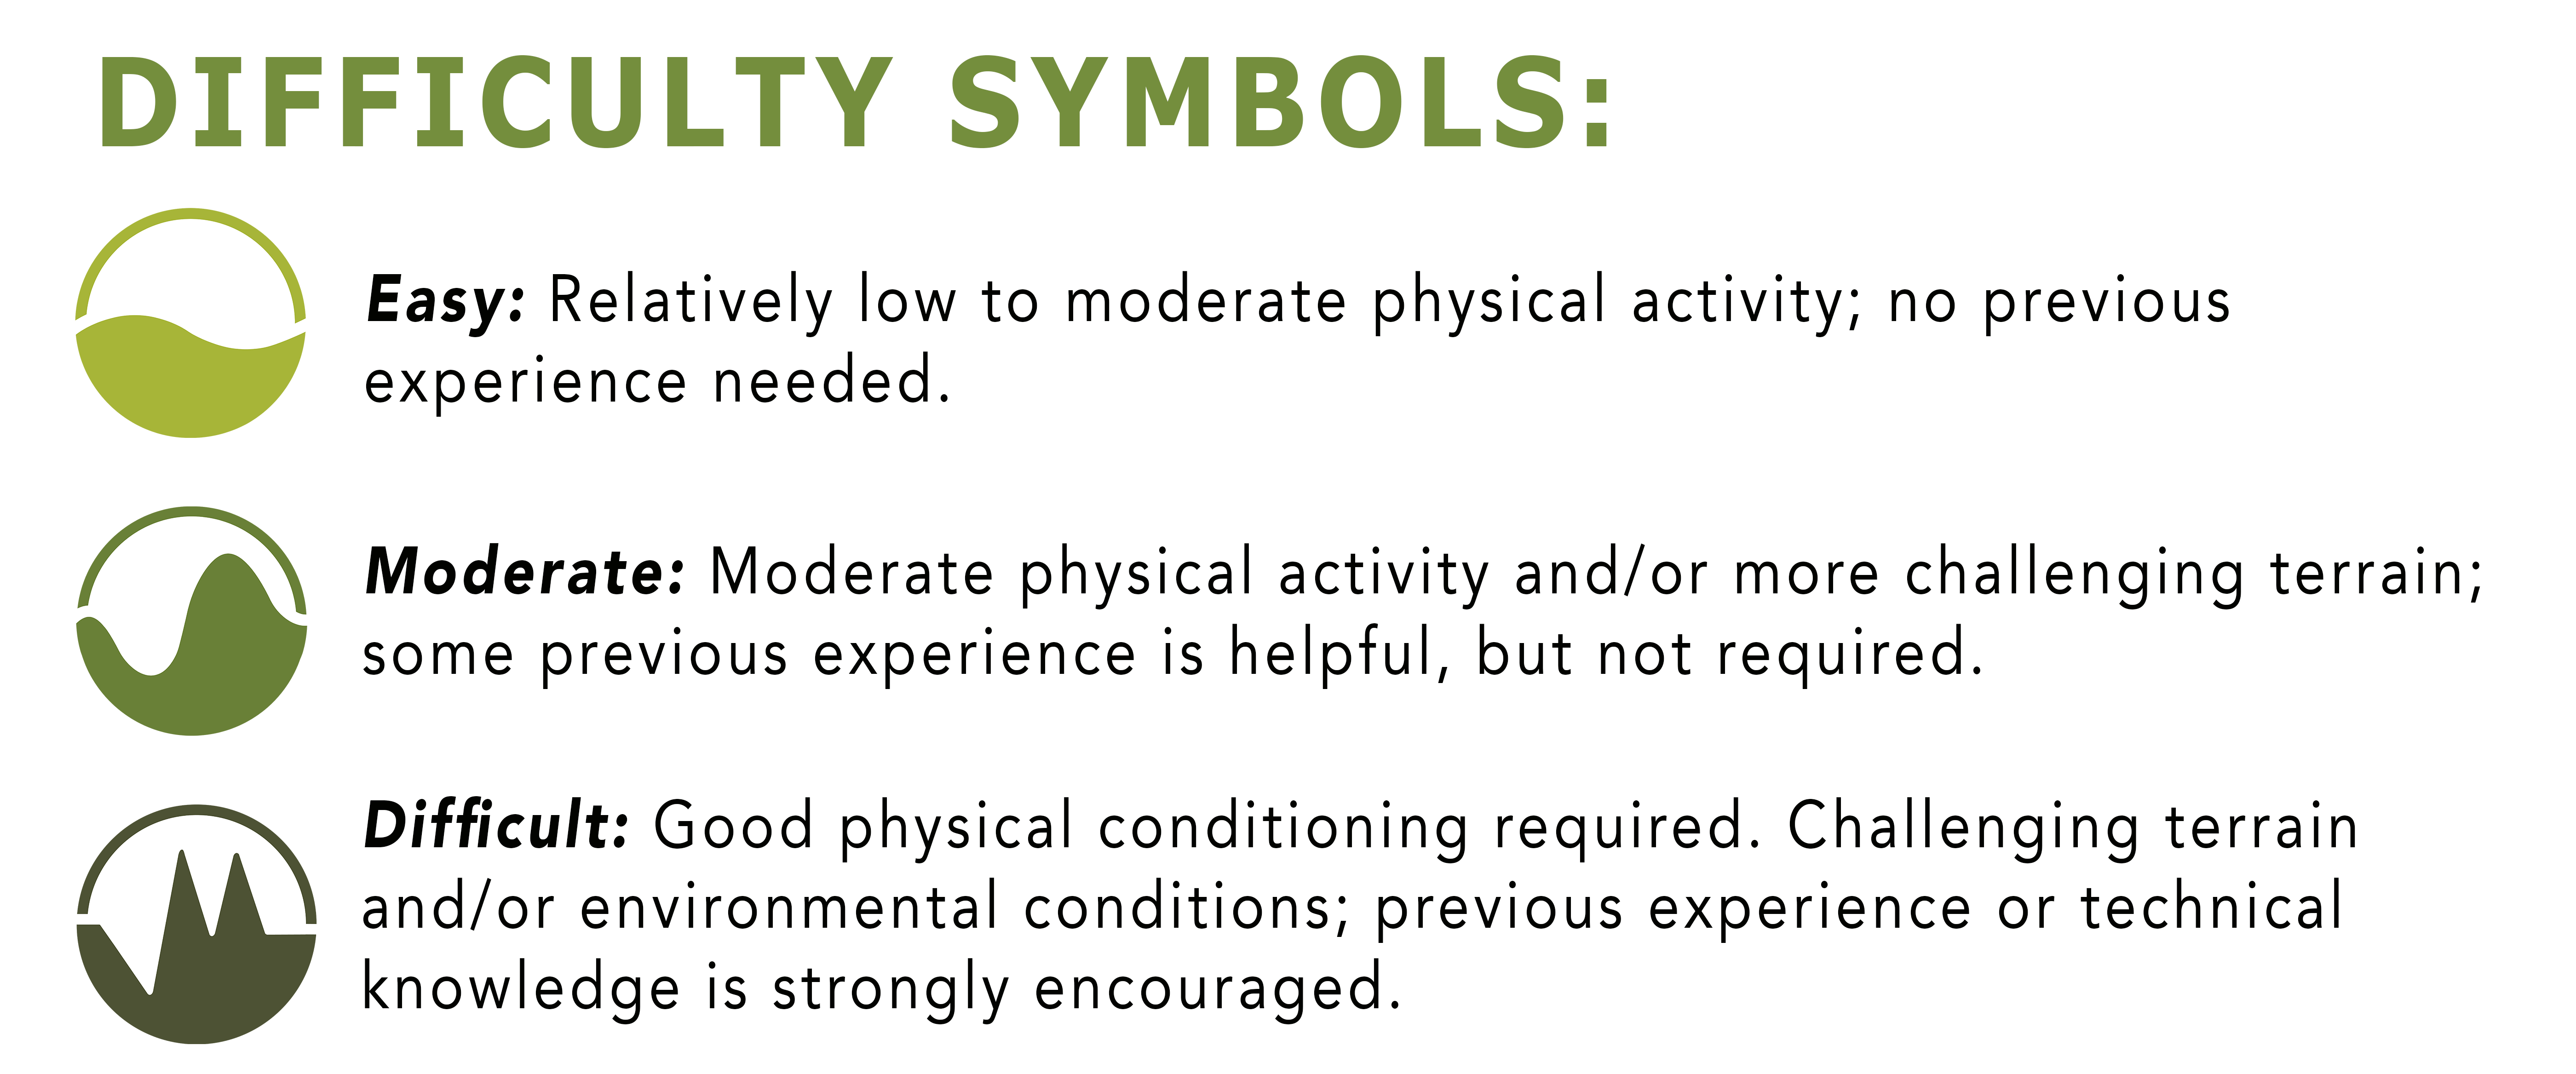 Difficulty Level Descriptions: Easy: Relatively low to moderate physical activity; no previous experience needed. Moderate: Moderate physical activity and/or more challenging terrain; some previous experience is helpful, but not required.  Difficult: Good physical conditioning required. Challenging terrain  and/or environmental conditions; previous experience or technical knowledge is strongly encouraged.